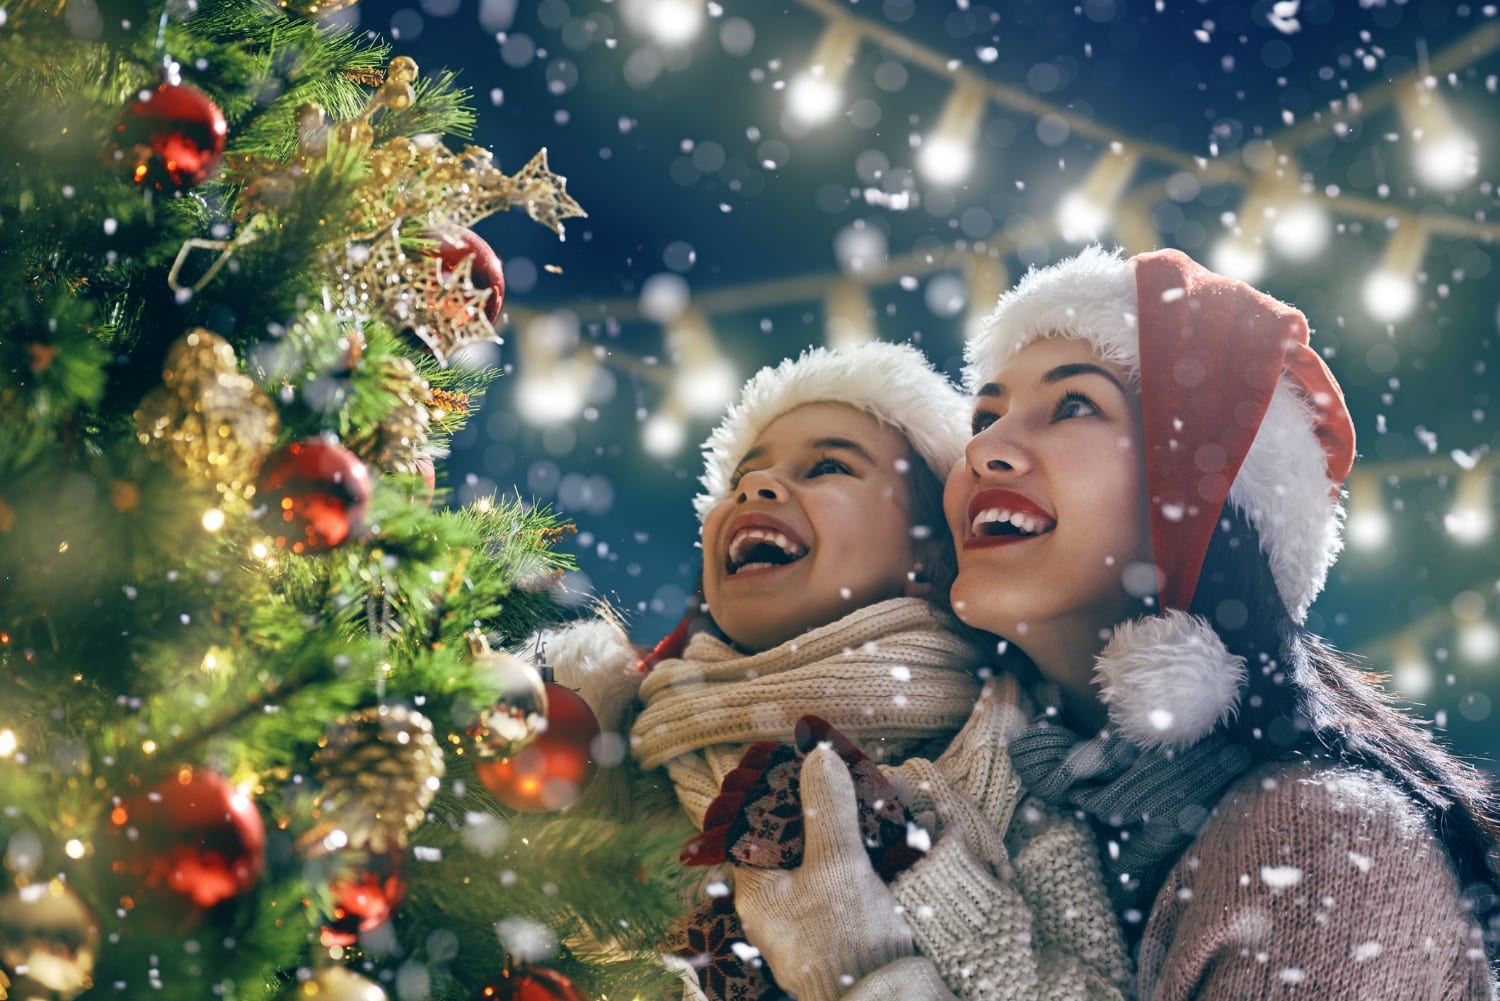 What You Need to Know About Lancaster Tree Lighting Events